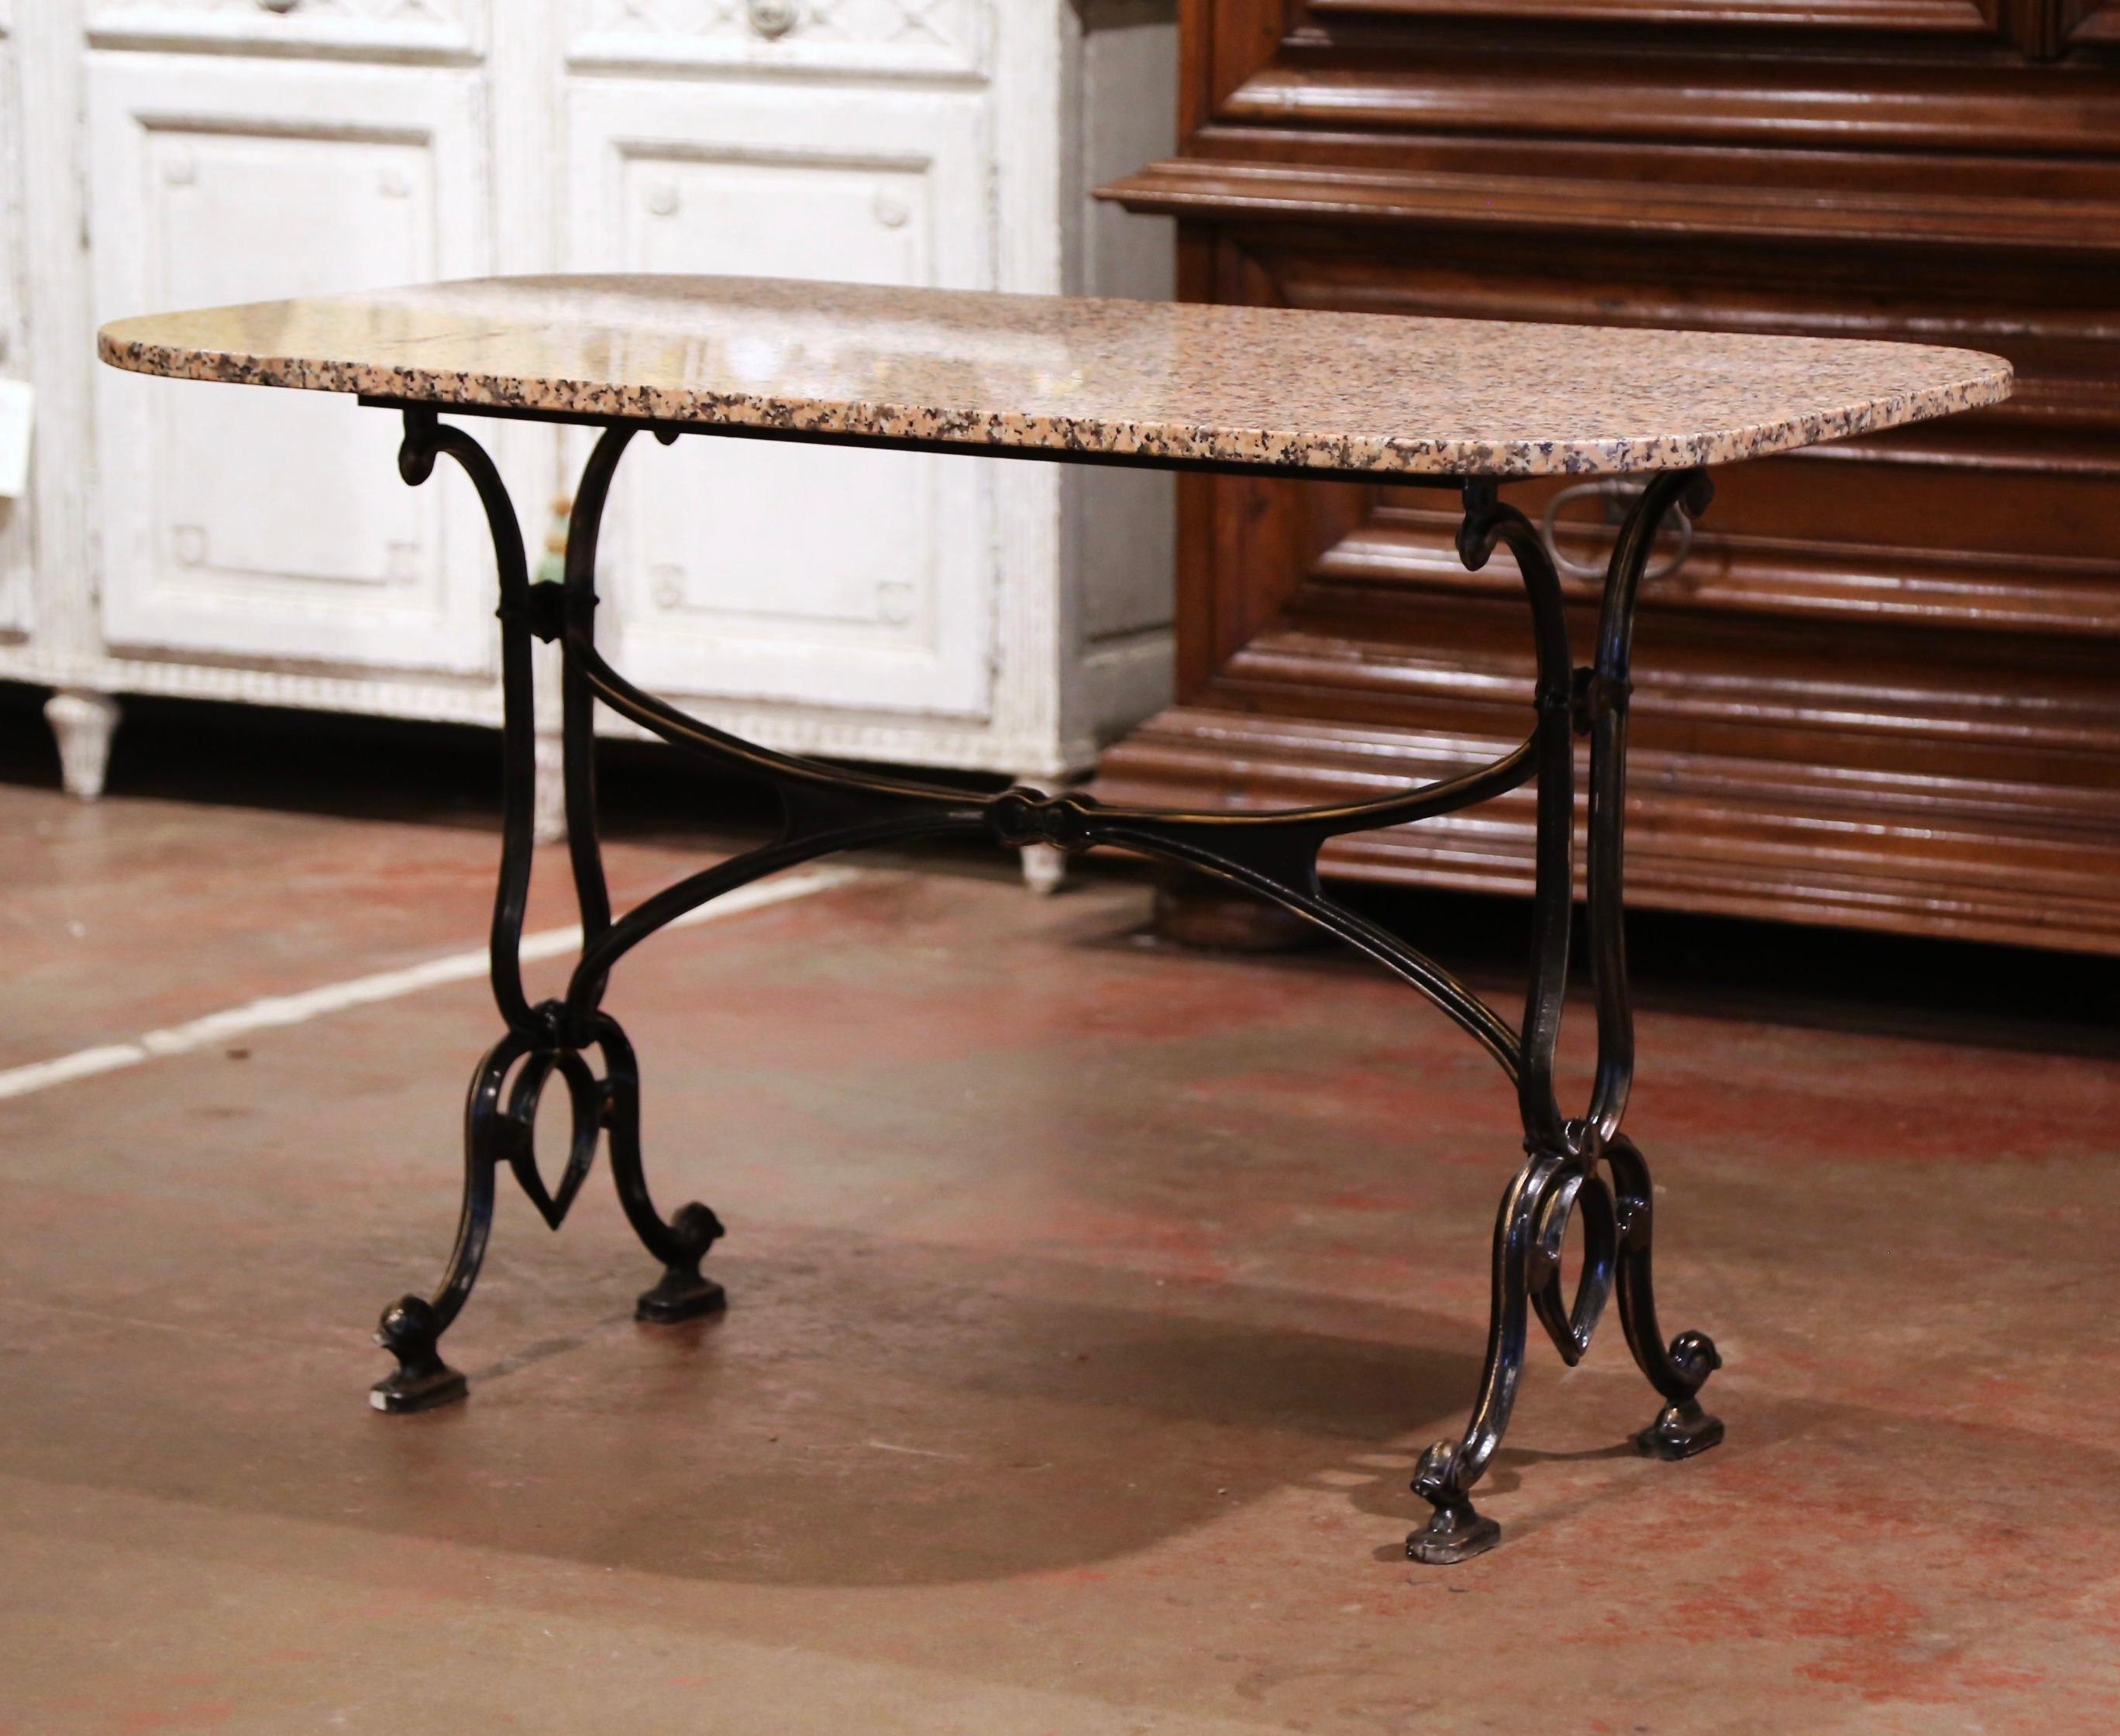 Crafted in Paris, France, and marked DAD, the antique cast iron table sits on a trestle base with elegant curved legs ending with scrolled feet, and joined with a double decorative stretcher. The sturdy iron base is dressed a rectangular variegated